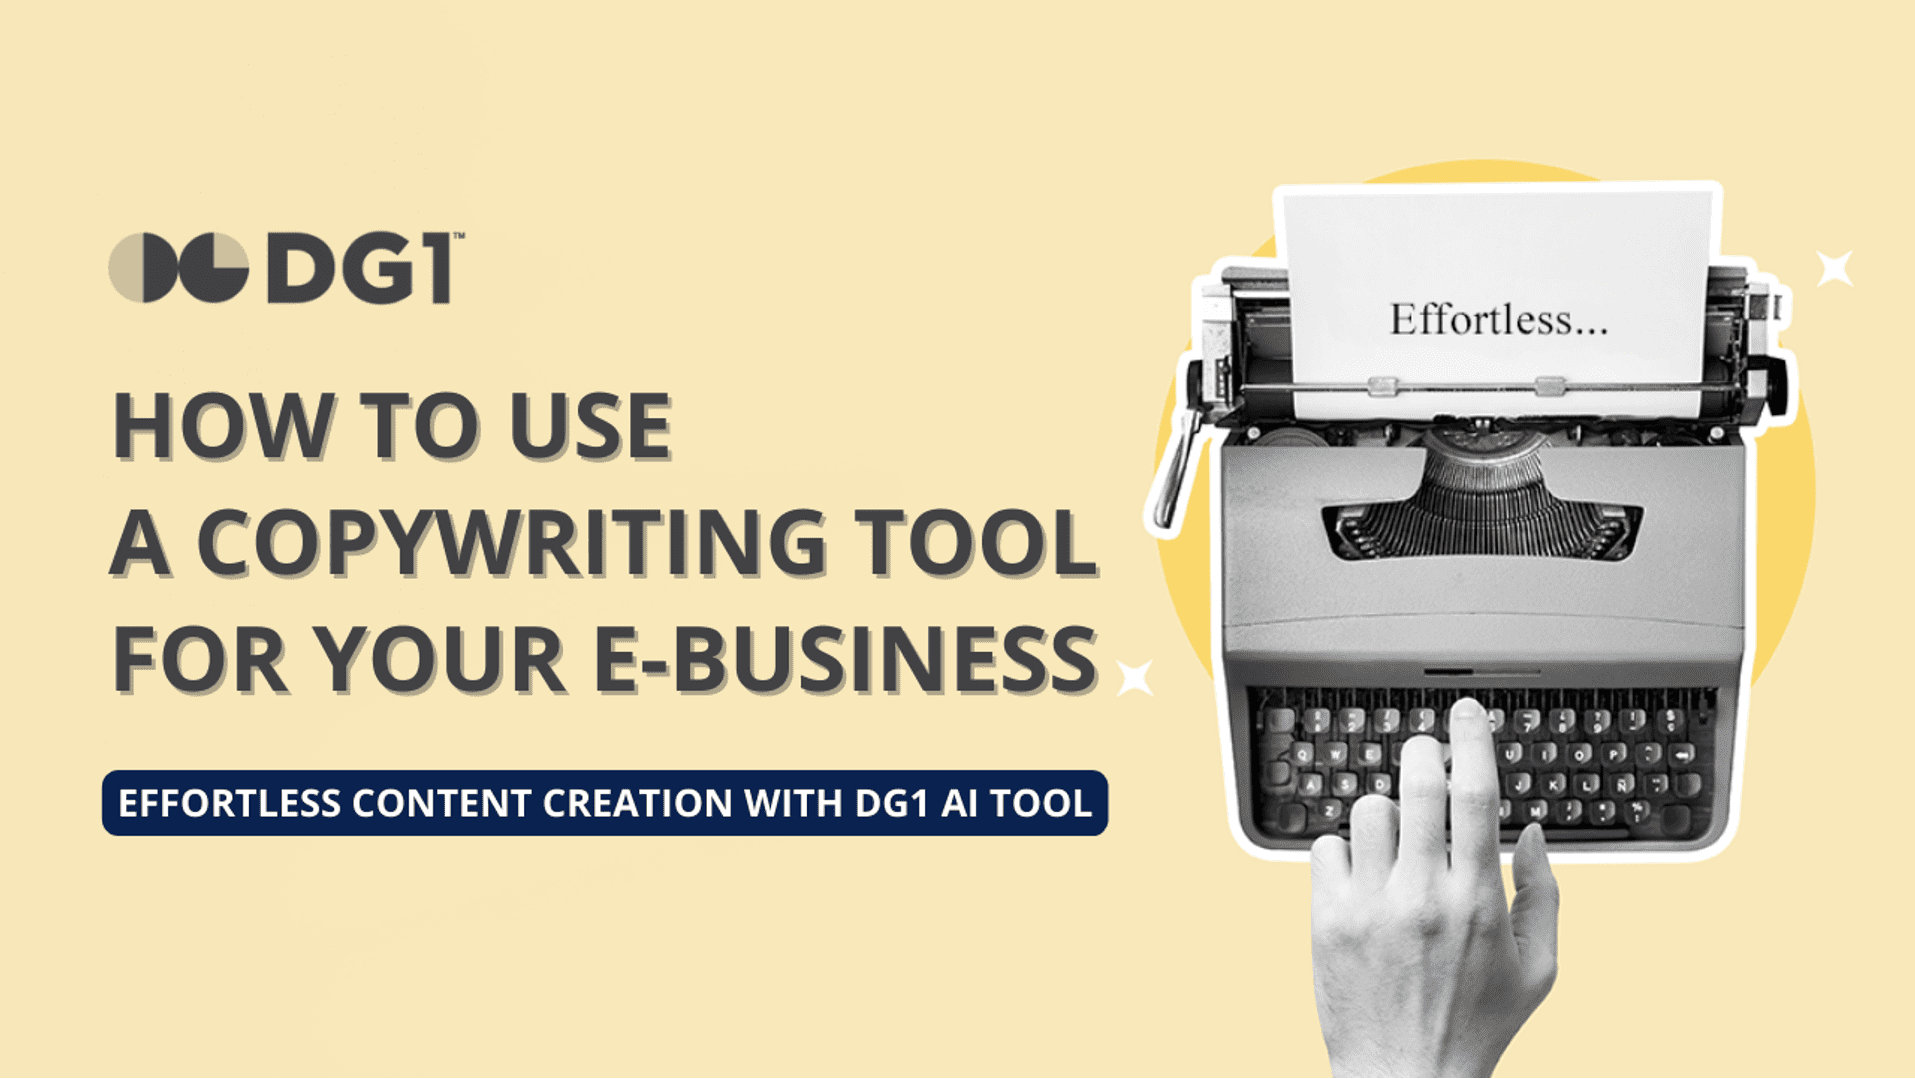 Effortless content creation with DG1's AI Copywriting Tool for E-Businesses